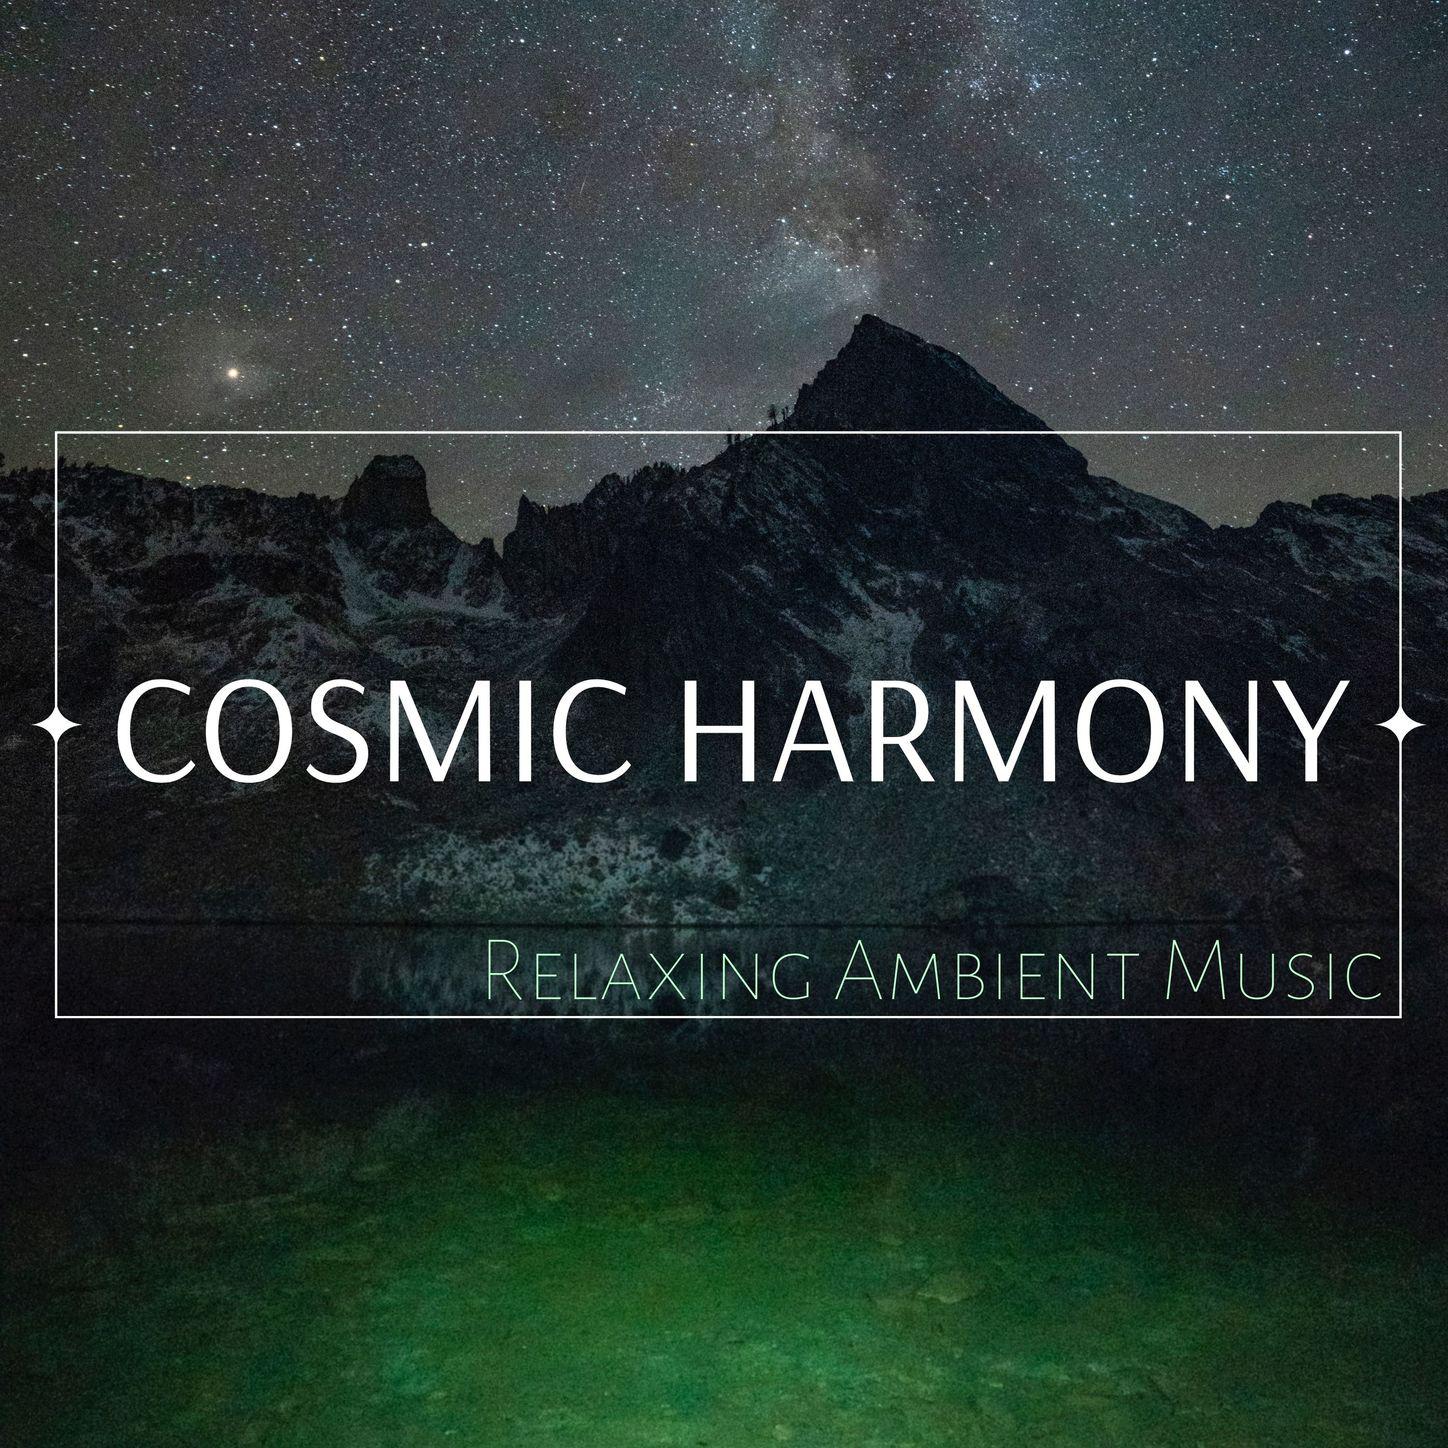 Cosmic Harmony - Relaxing Ambient Music